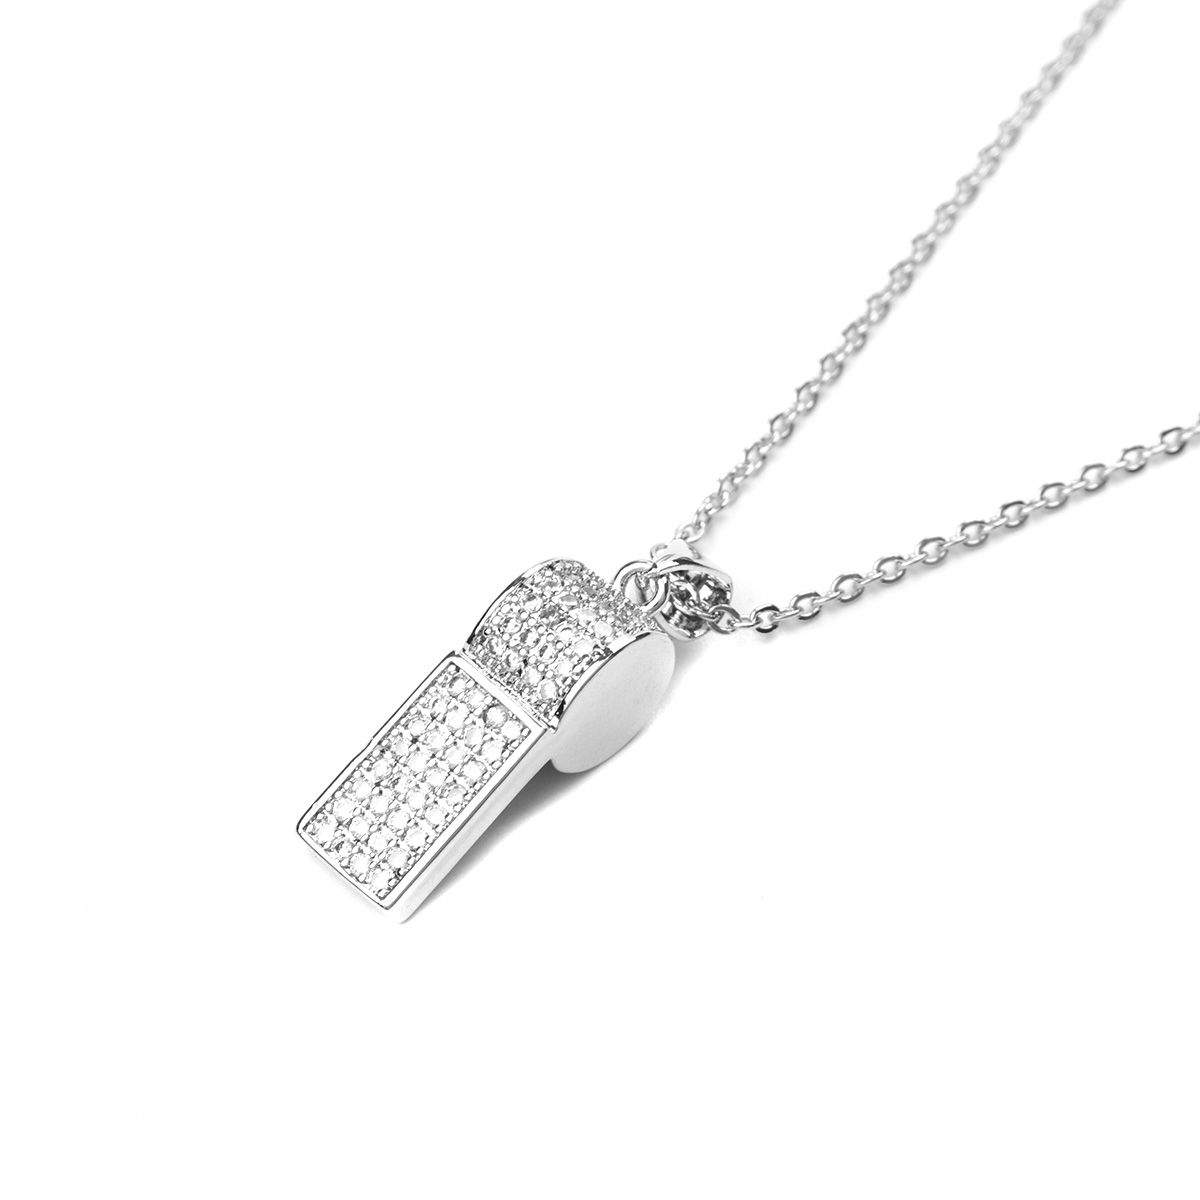 Picture of Stainless Steel Necklace Silver Tone Whistle Clear Cubic Zirconia 45cm(17 6/8") long, 1 Piece